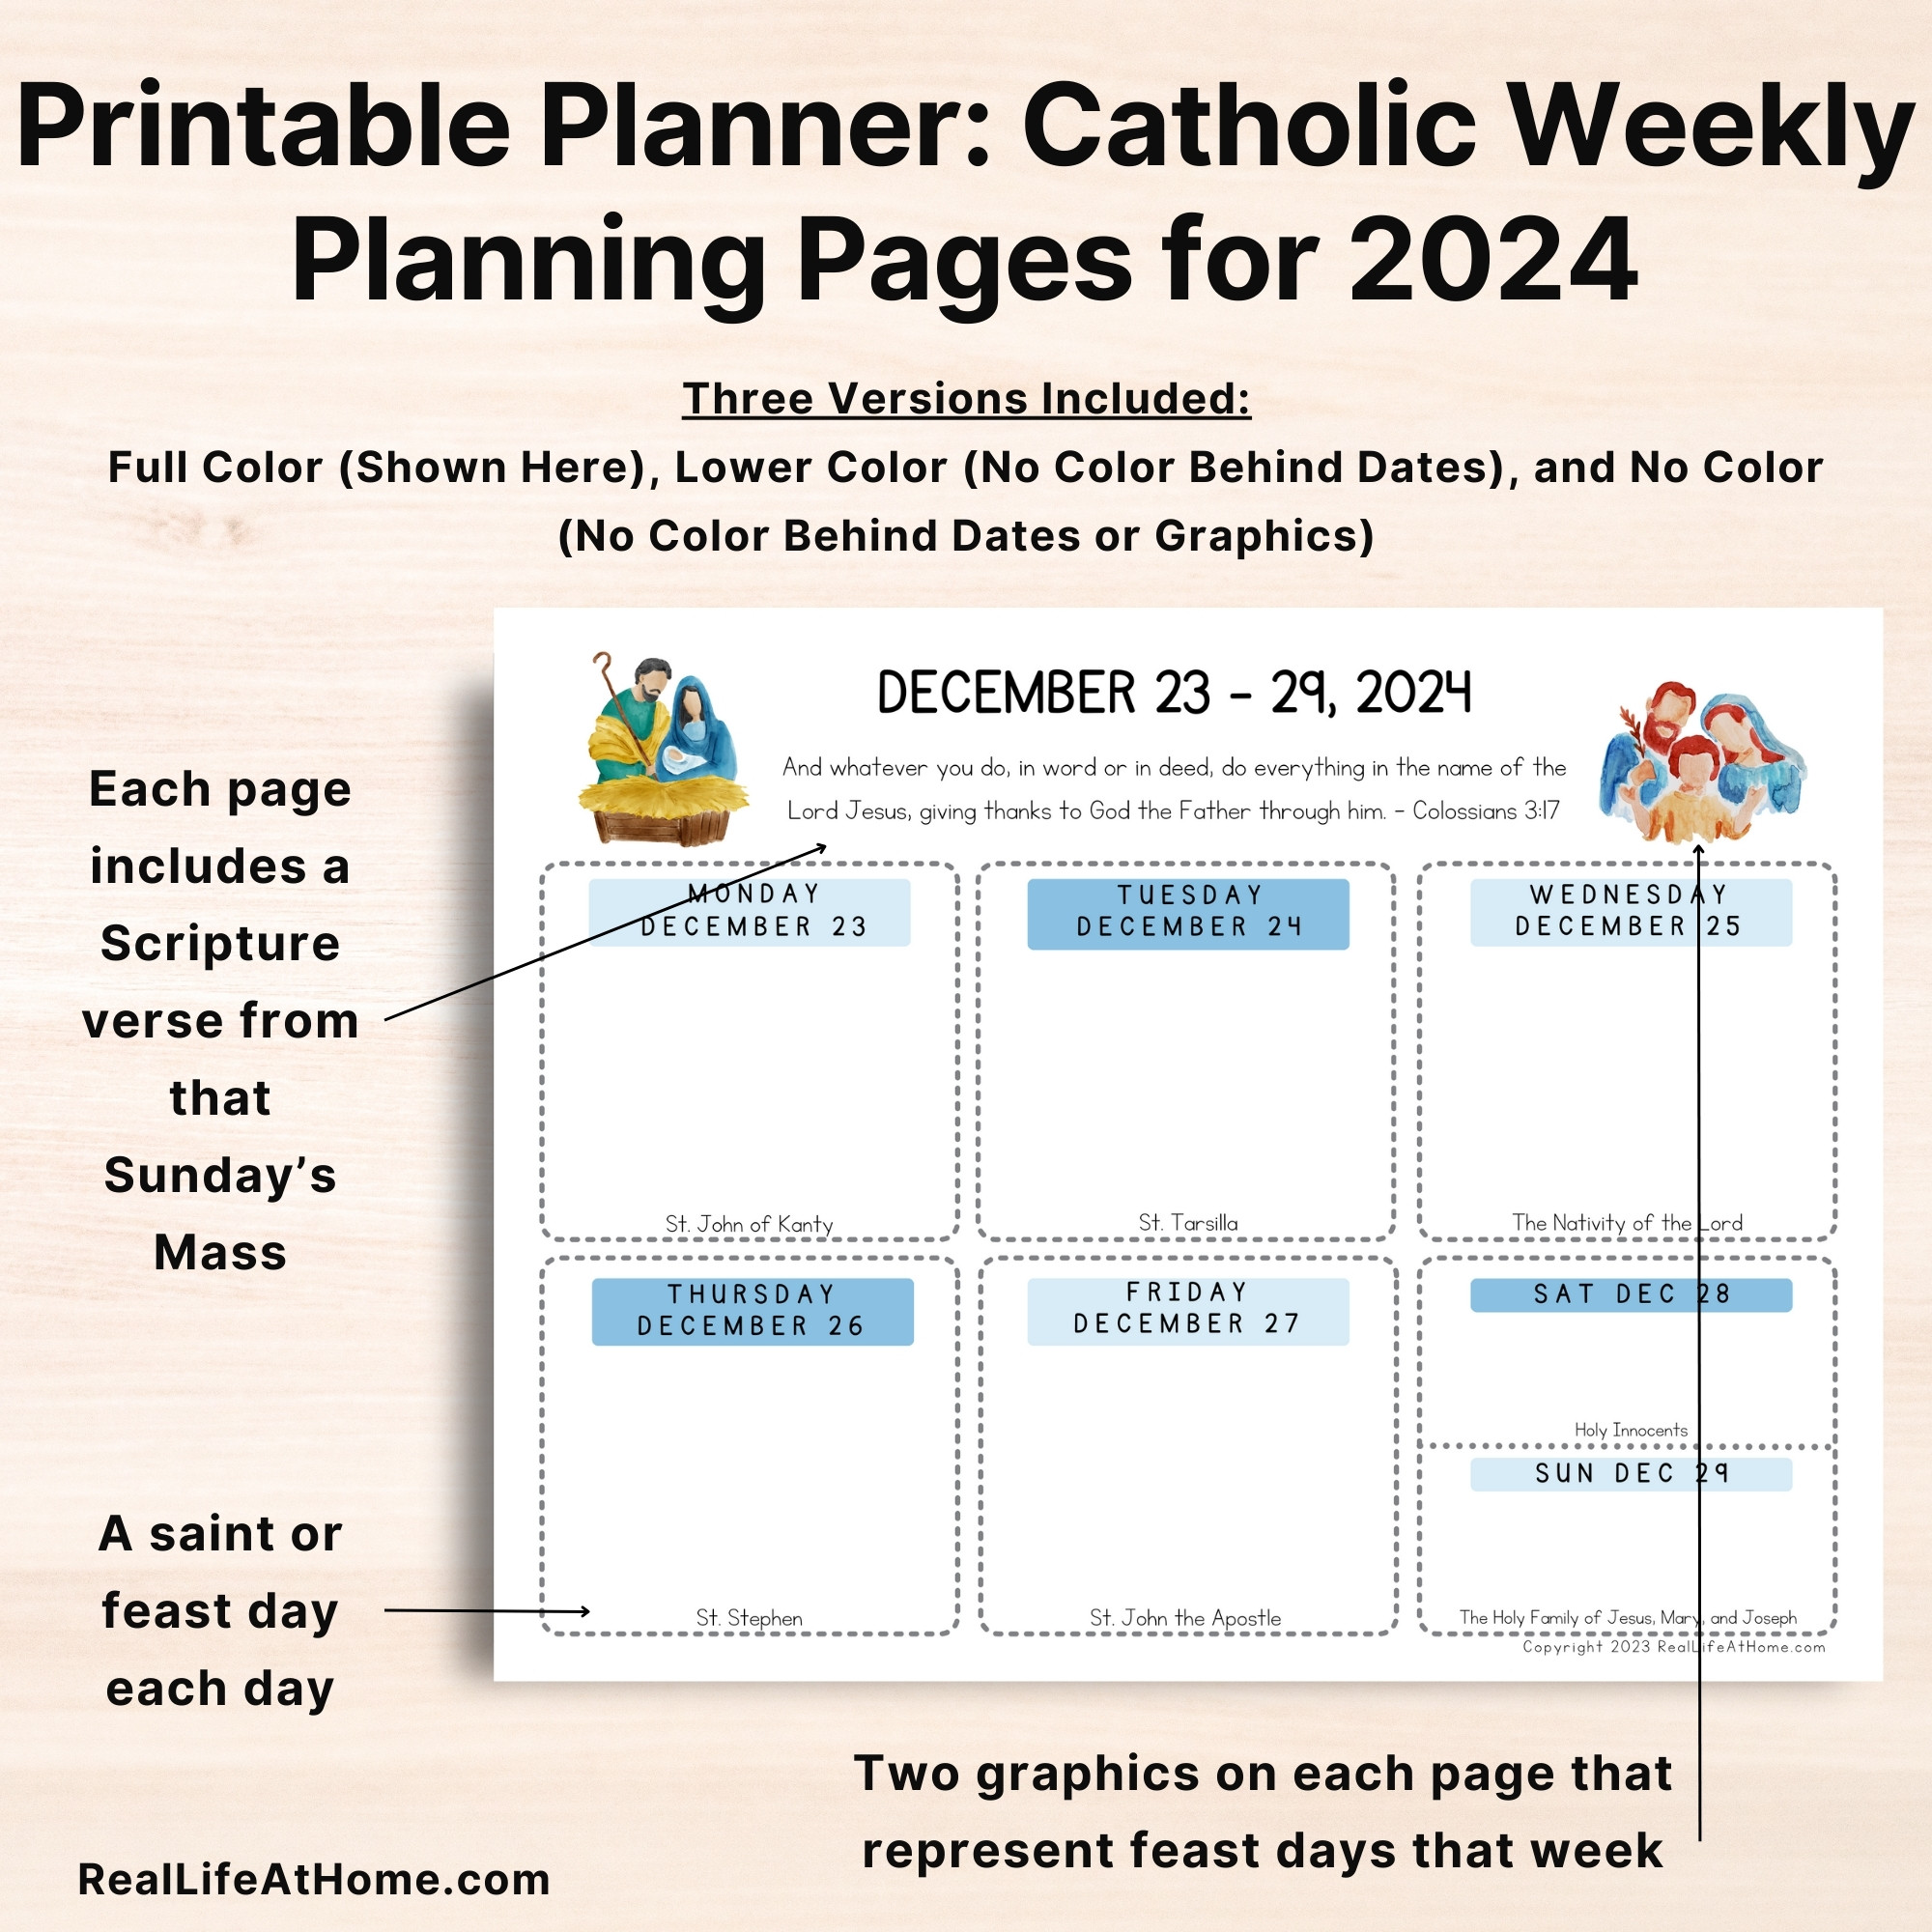 Features included on the Catholic Planning Pages for 2024